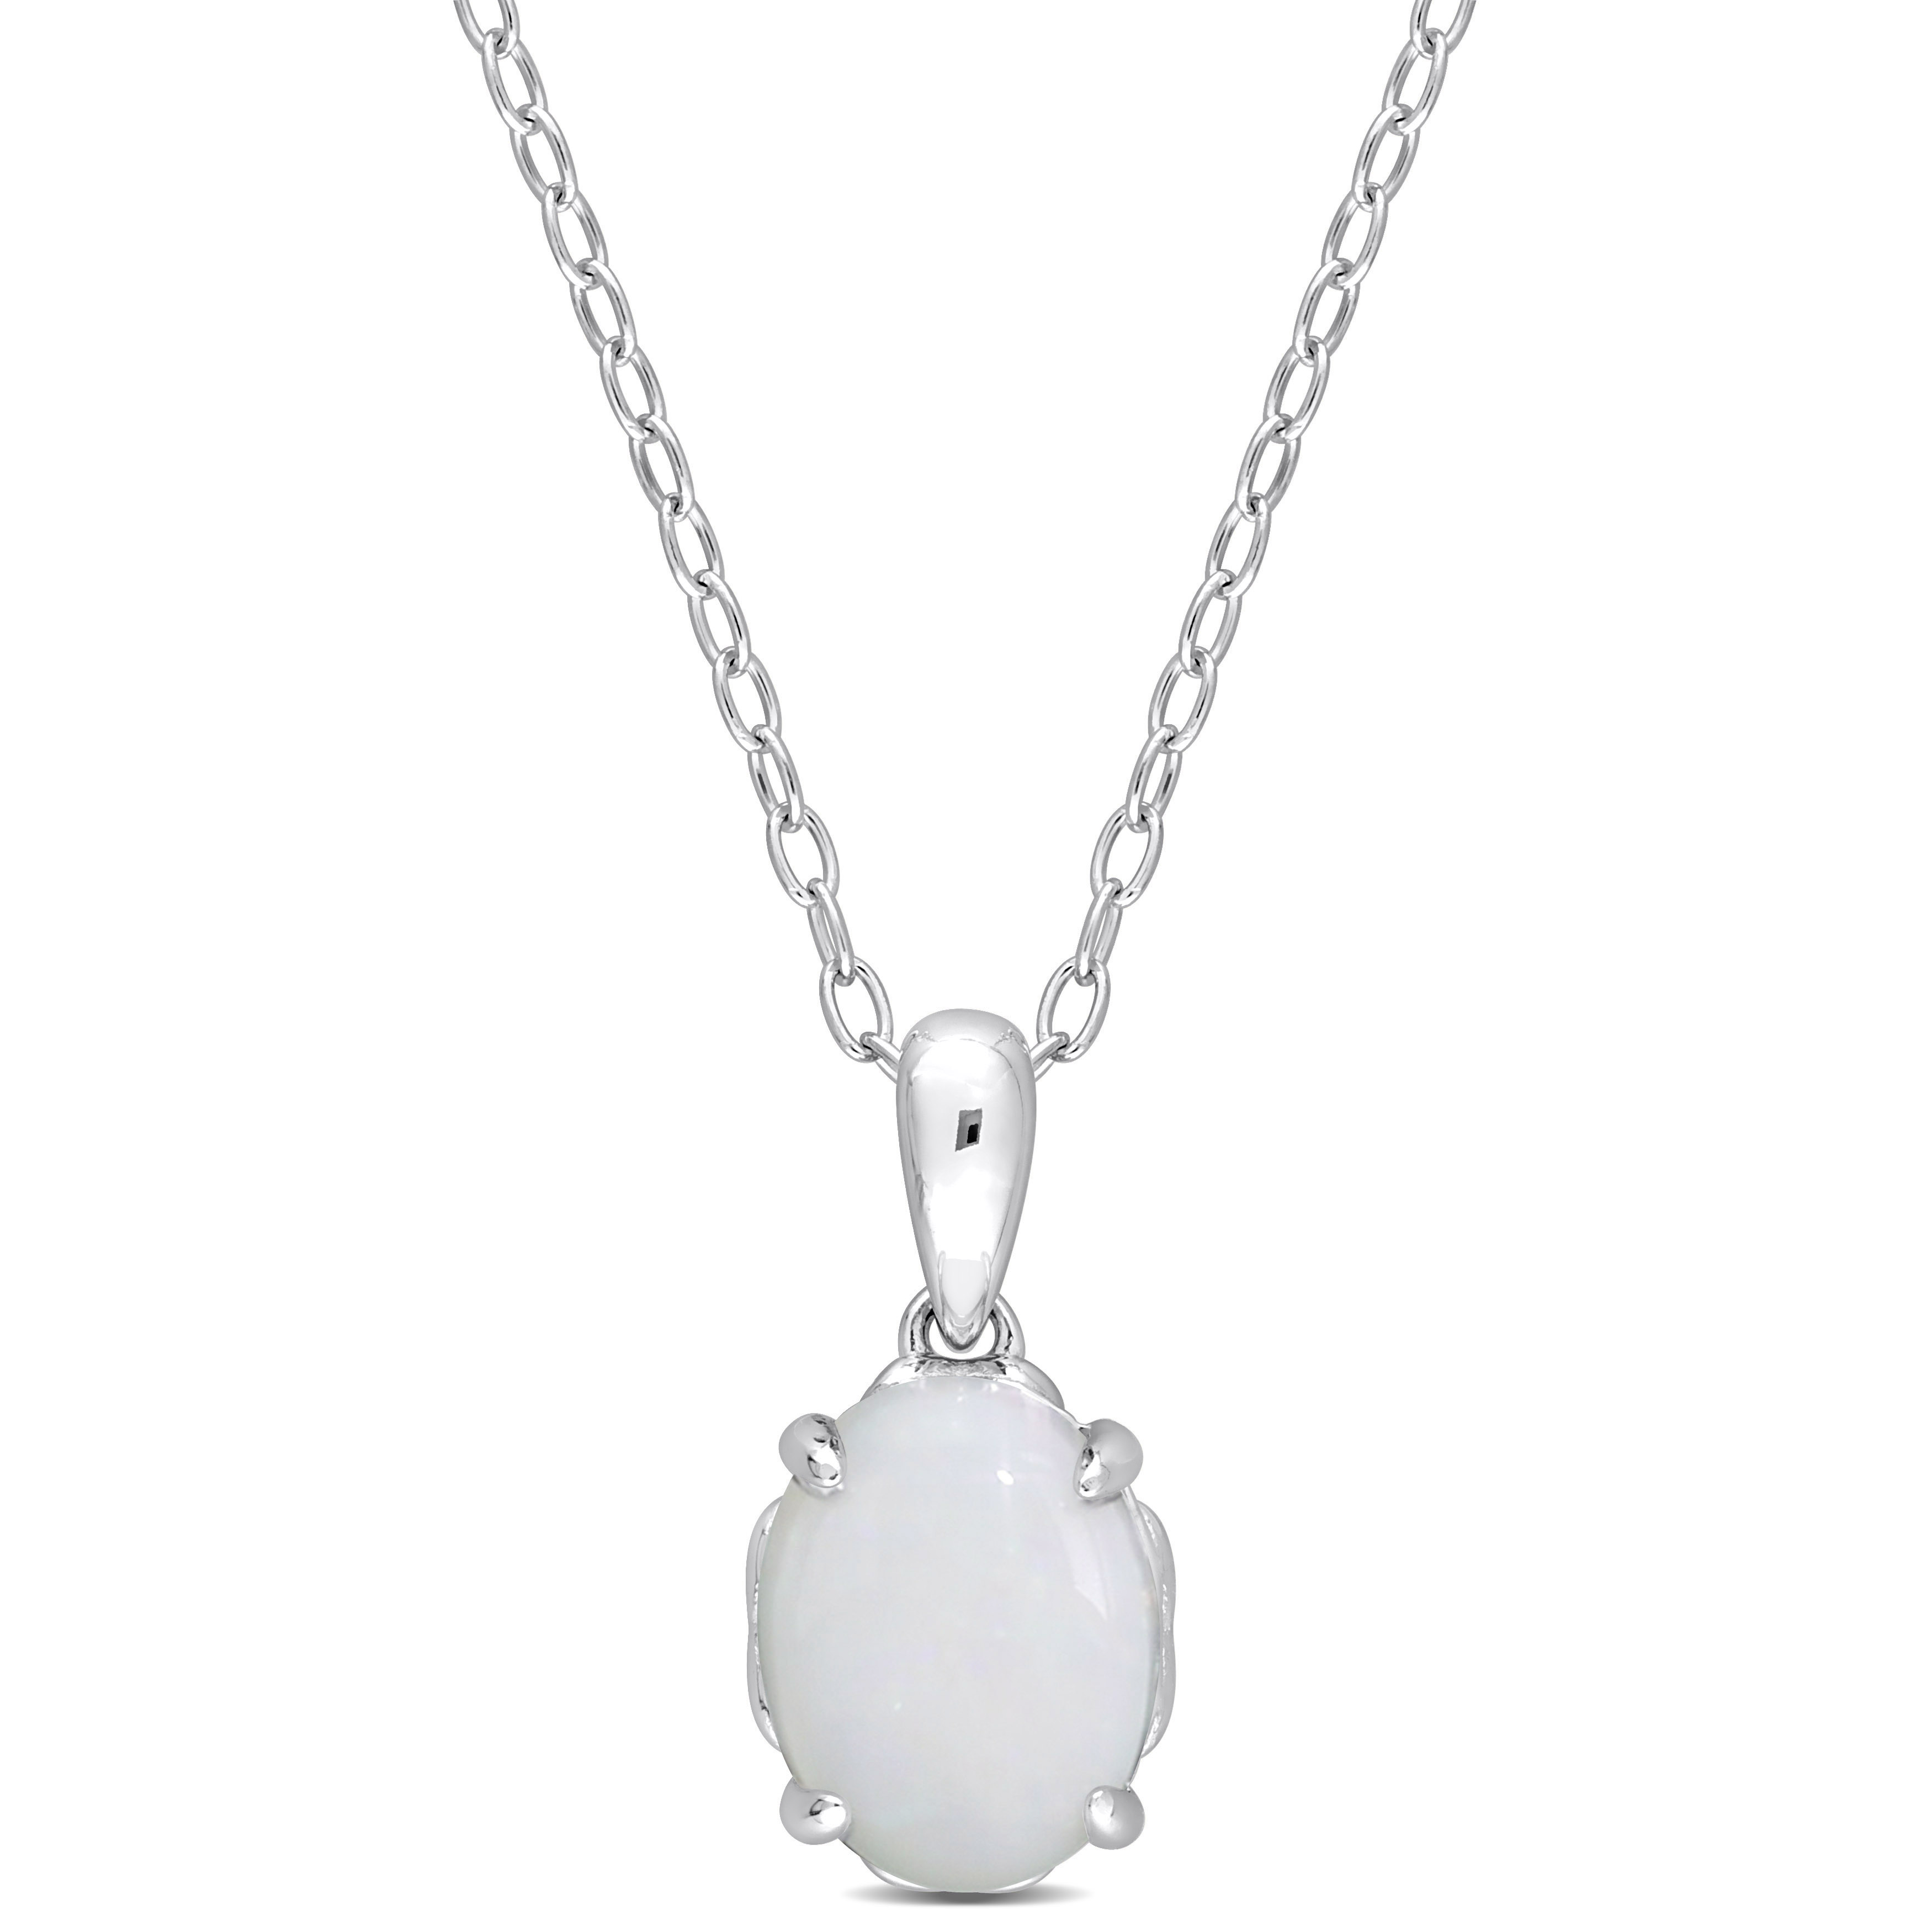 1 CT TGW Oval Opal Solitaire Heart Design Pendant with Chain in Sterling Silver - 18 in.